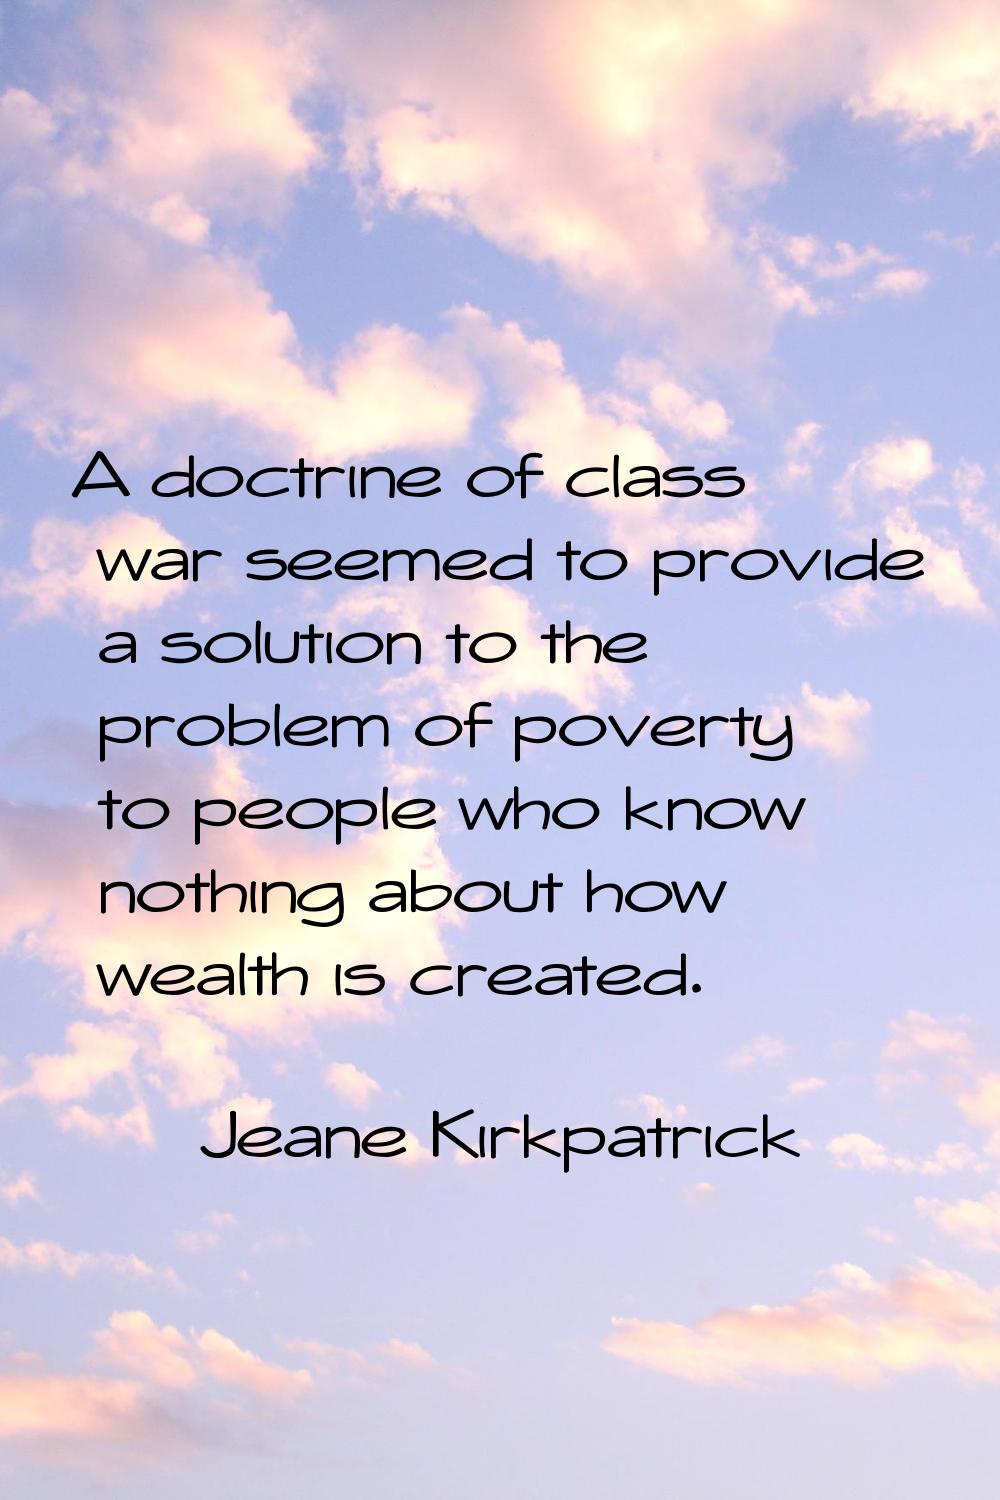 A doctrine of class war seemed to provide a solution to the problem of poverty to people who know n